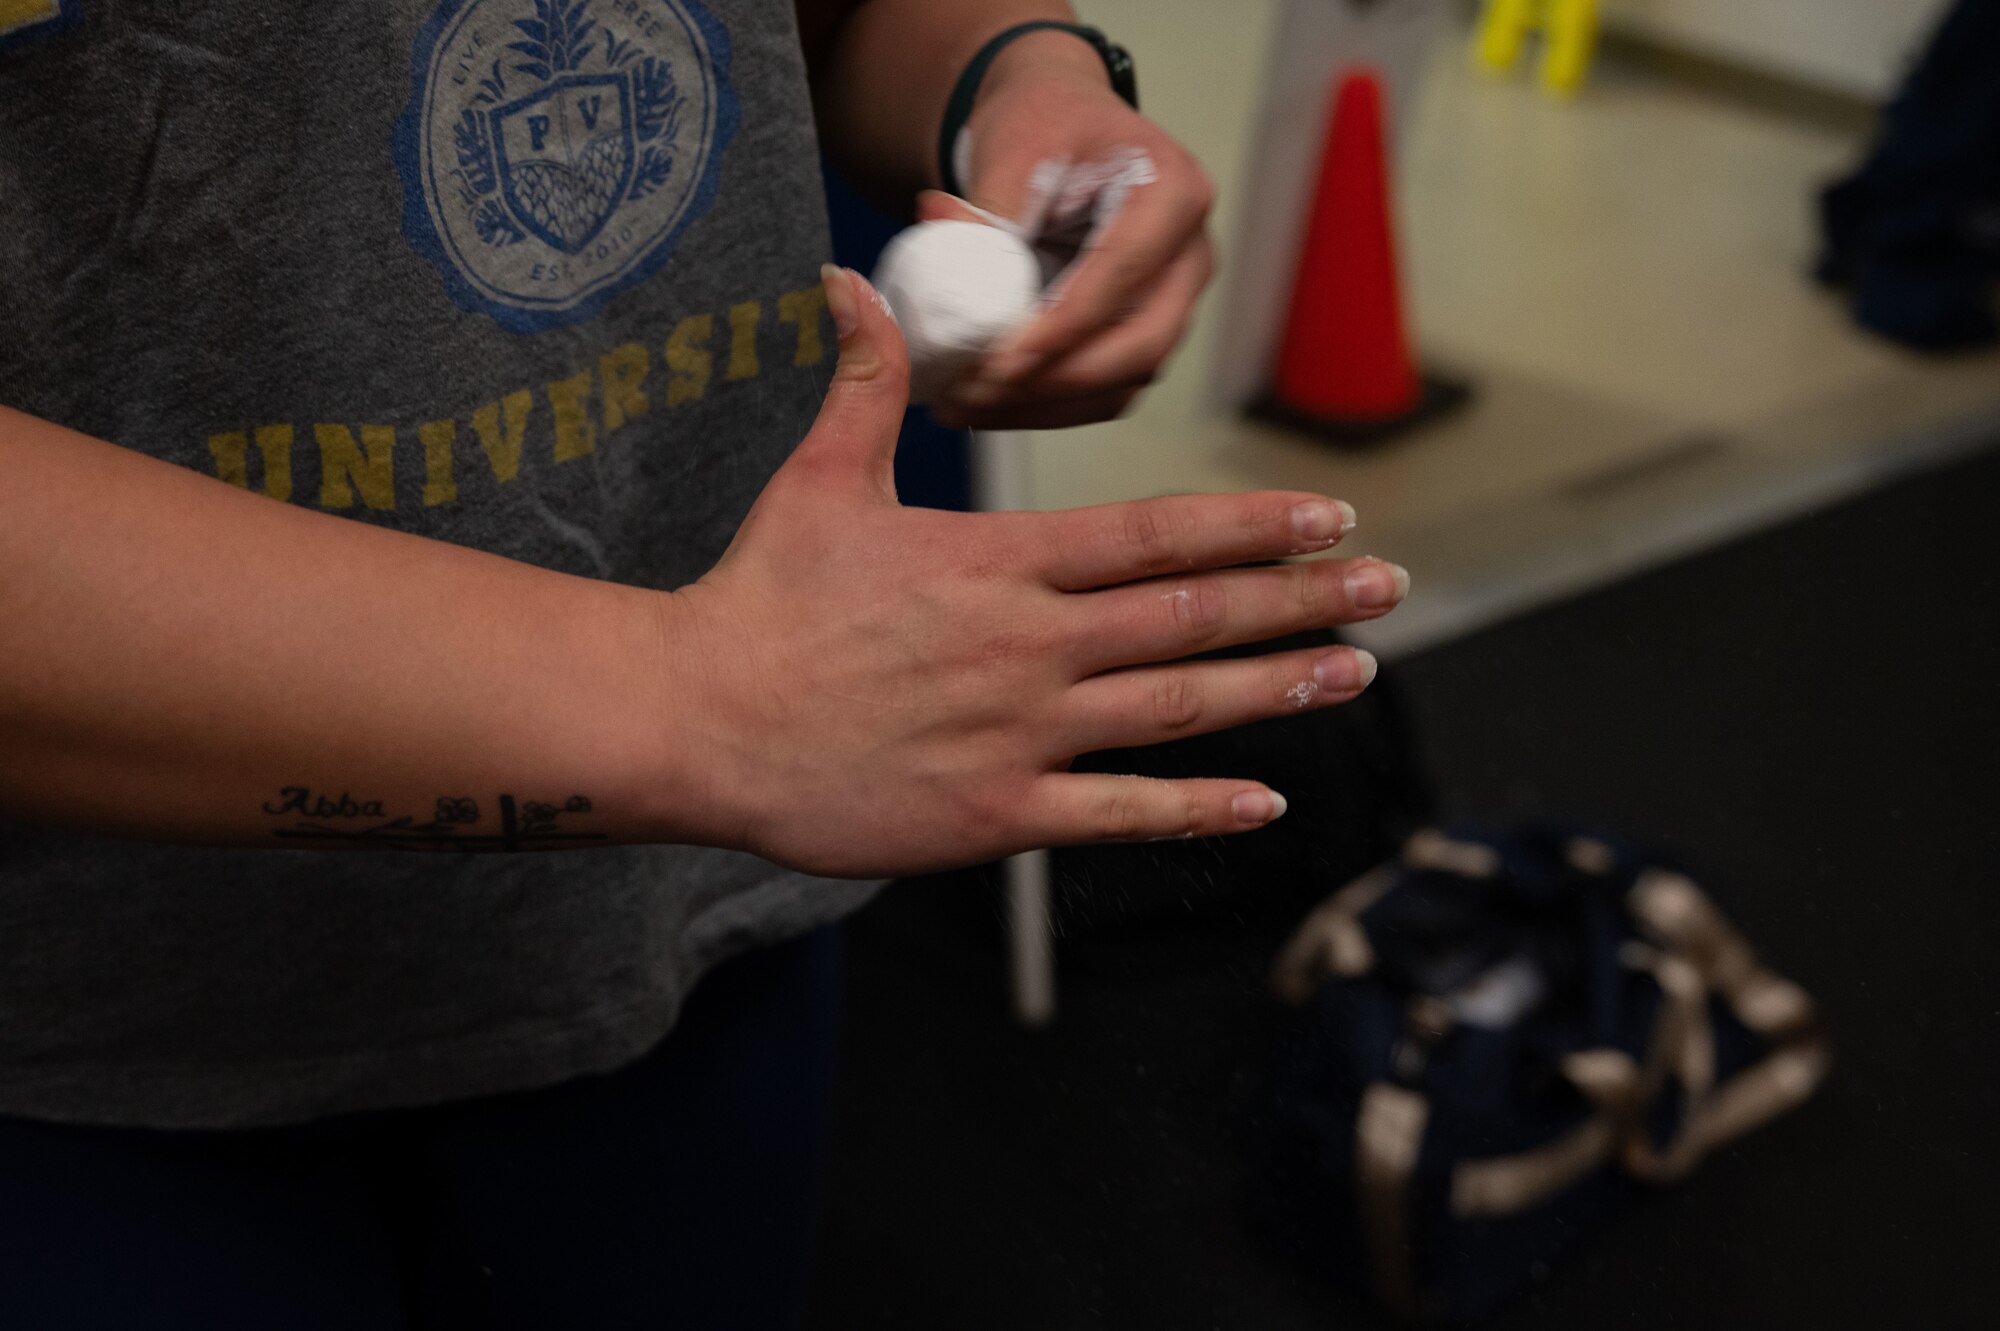 U.S. Air Force Airman Noelle Jennings, 436th Medical Group family health technician, uses chalk during a CrossFit class at Dover Air Force Base, Delaware, March 14, 2024. The Dover AFB Fitness Center CrossFit class is an ongoing program open to all active duty, reserve, spouses and Department of Defense card holders. (U.S. Air Force photo by Airman 1st Class Dieondiere Jefferies)